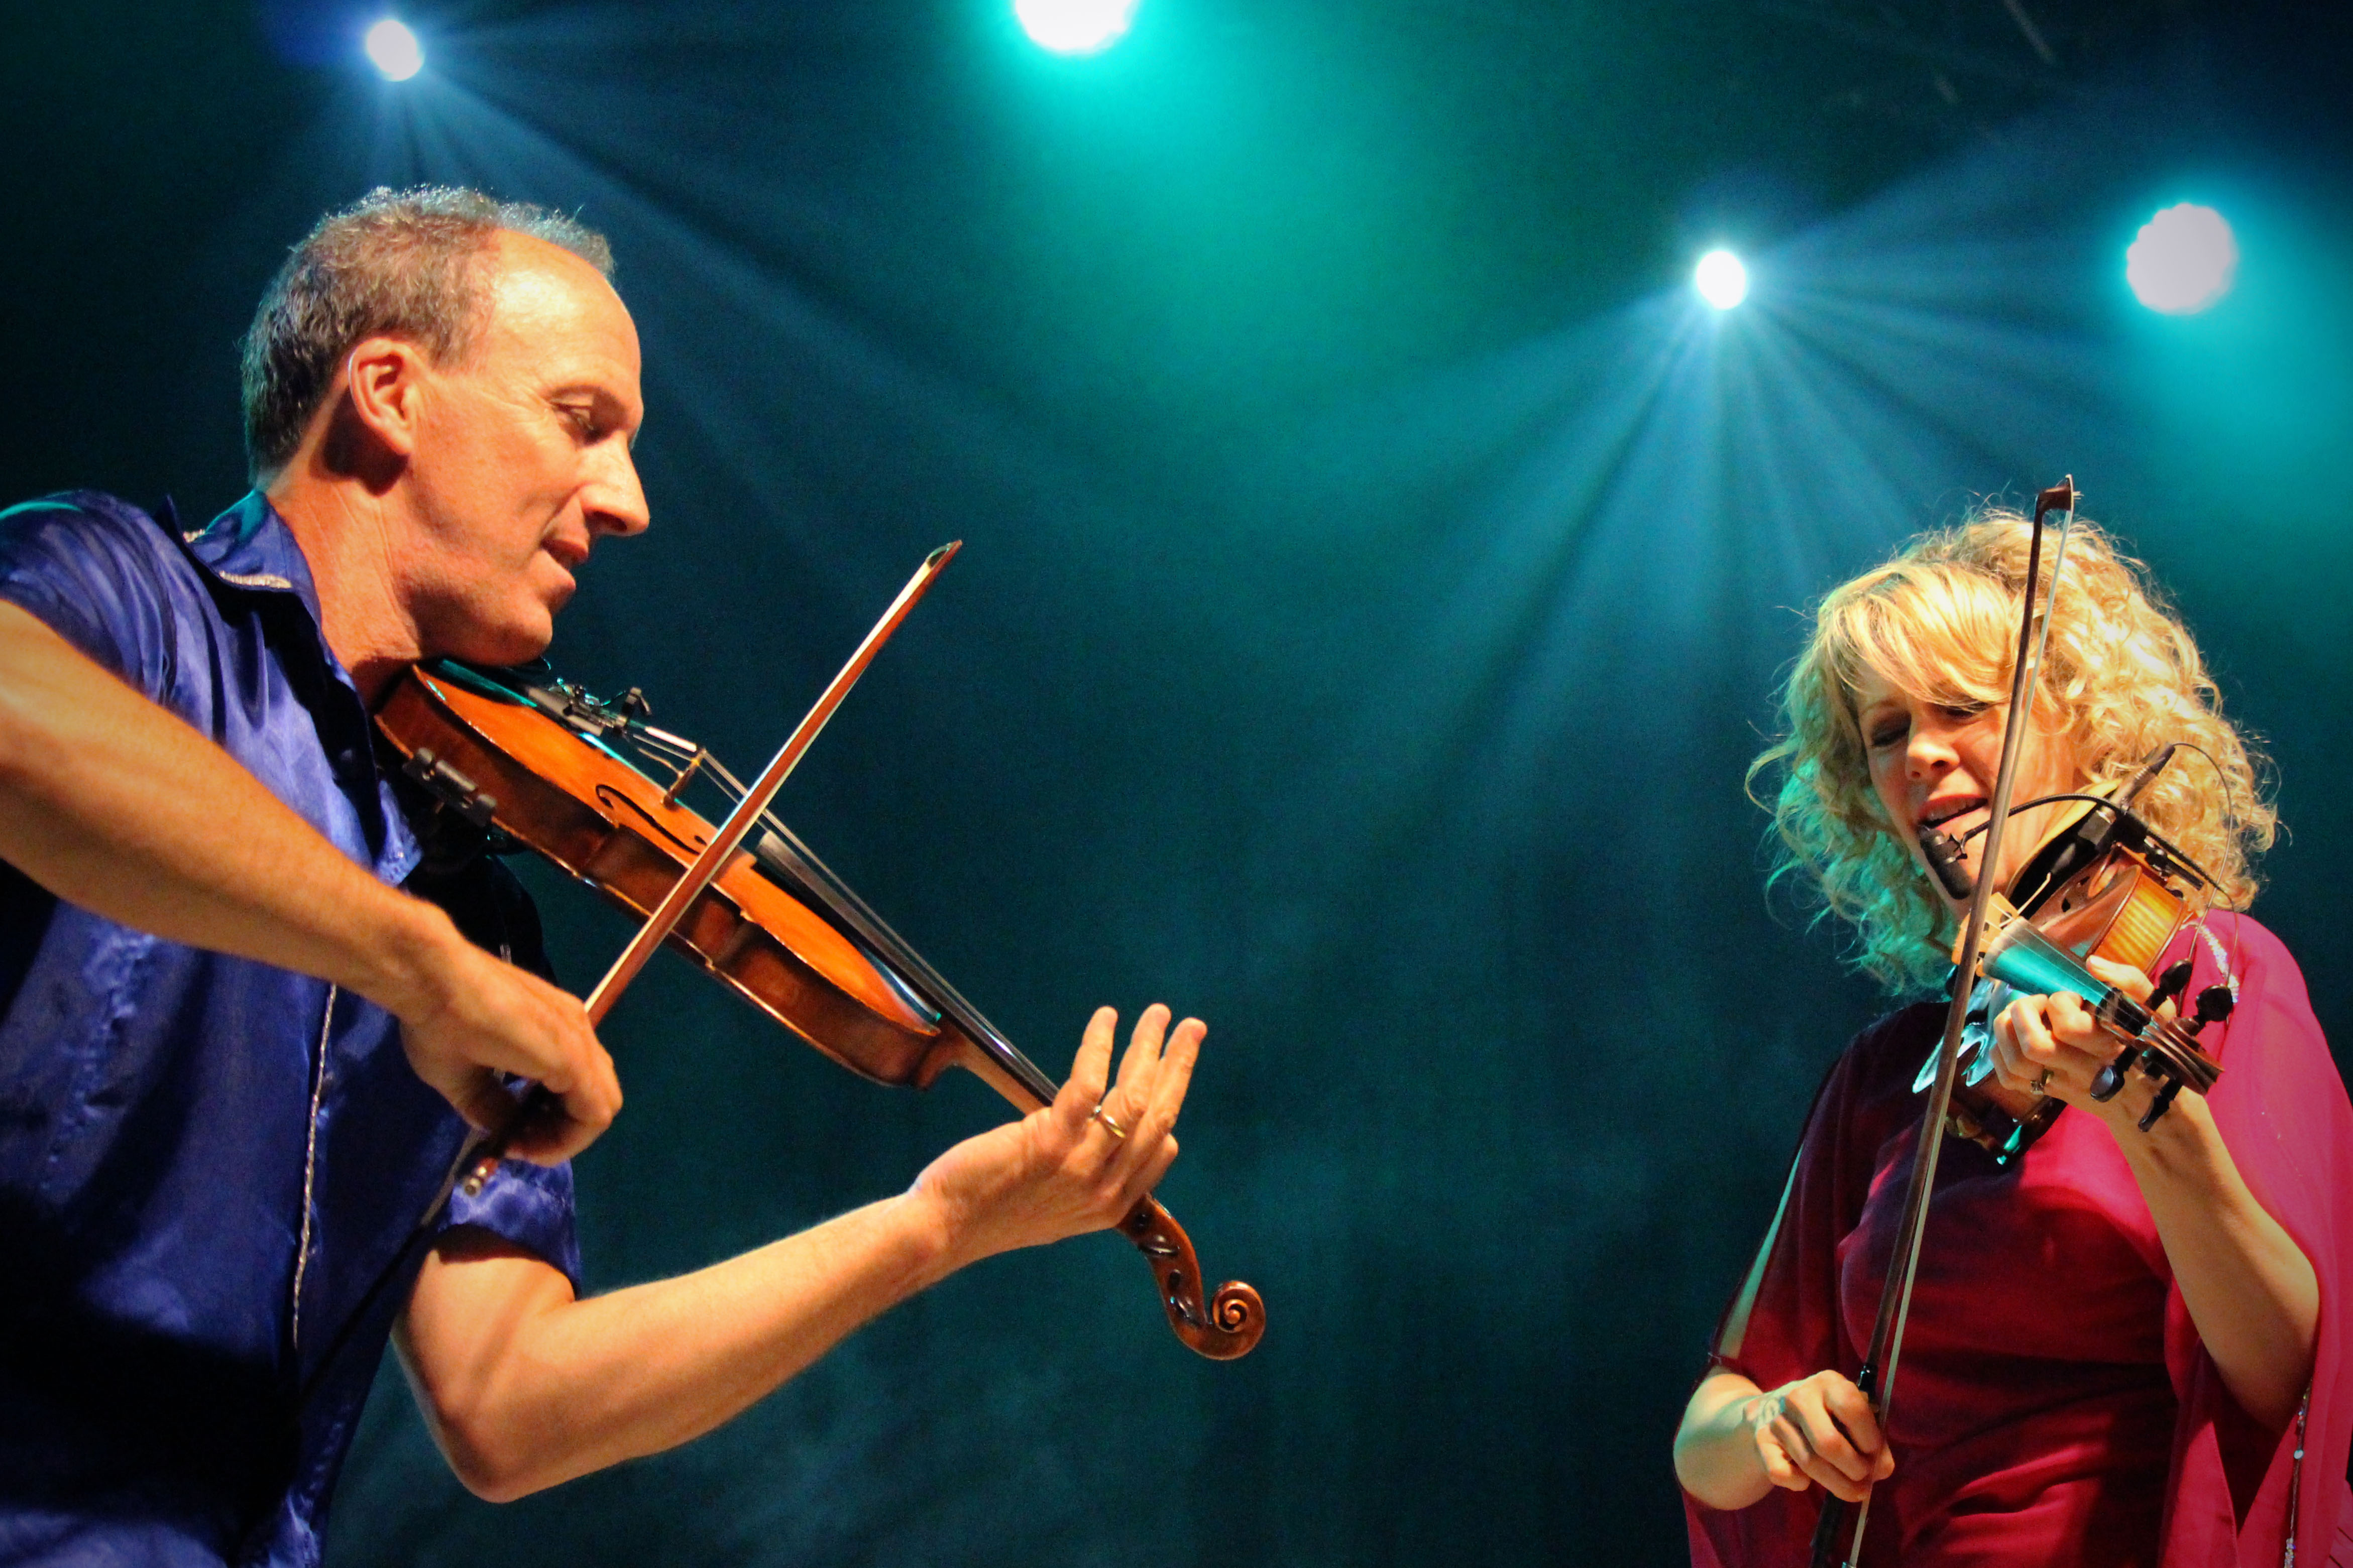 NLFB Artist Profile: Donnell Leahy and Natalie MacMaster